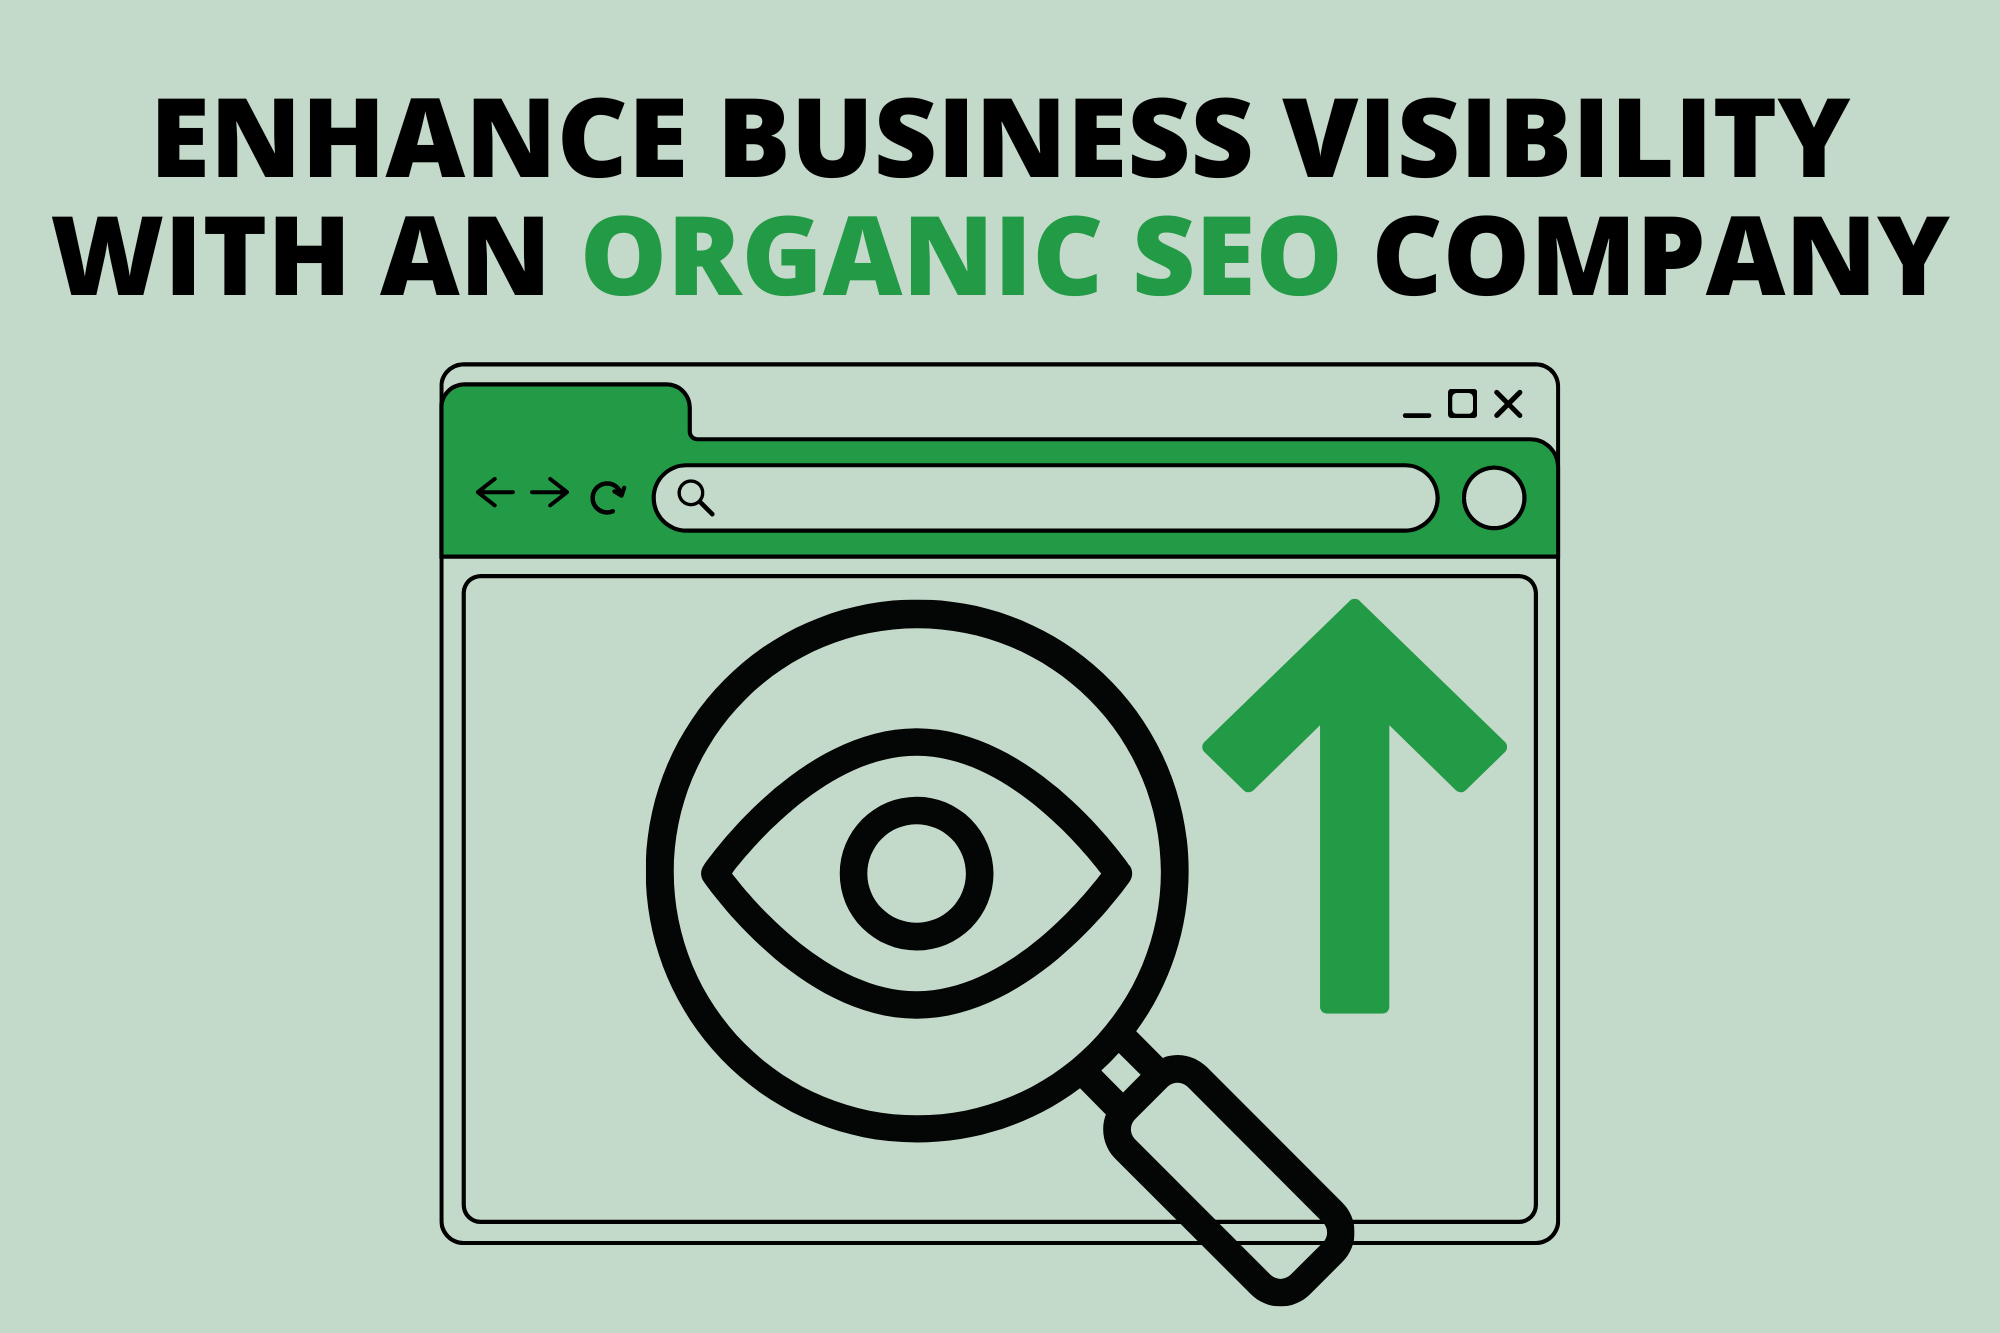 Enhance Business Visibility with an Organic SEO Company